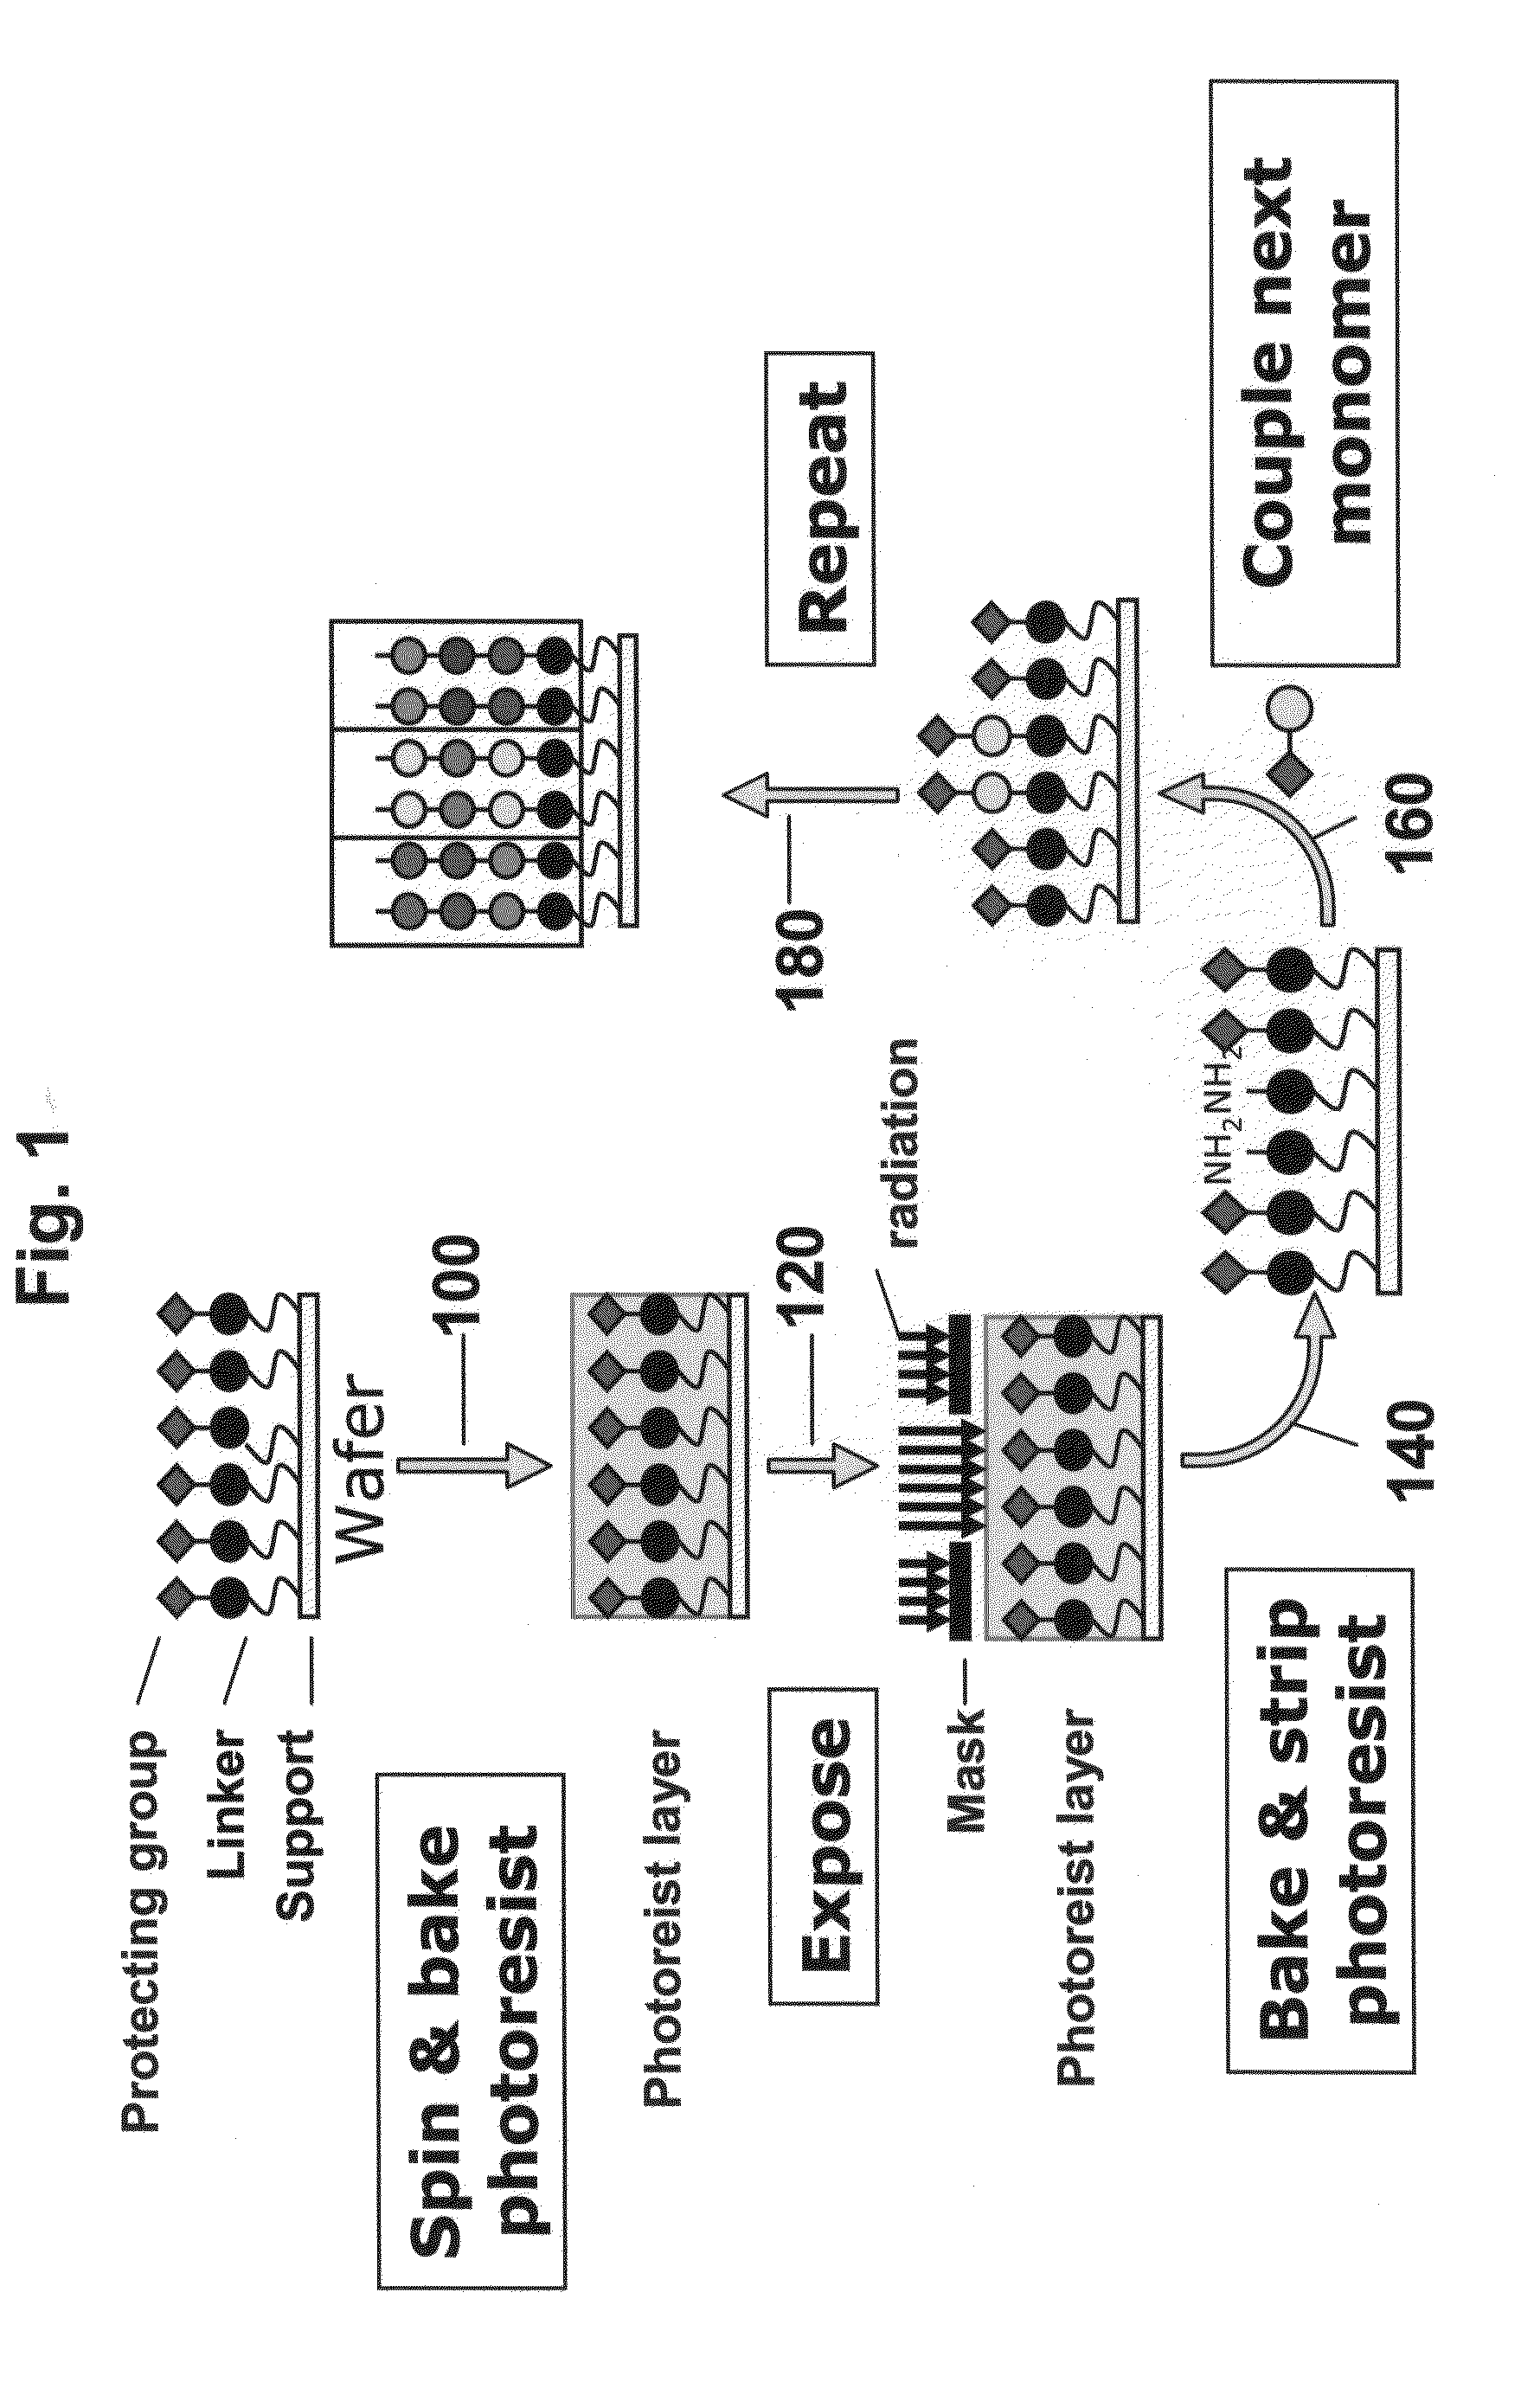 High density peptide arrays containing kinase or phosphatase substrates